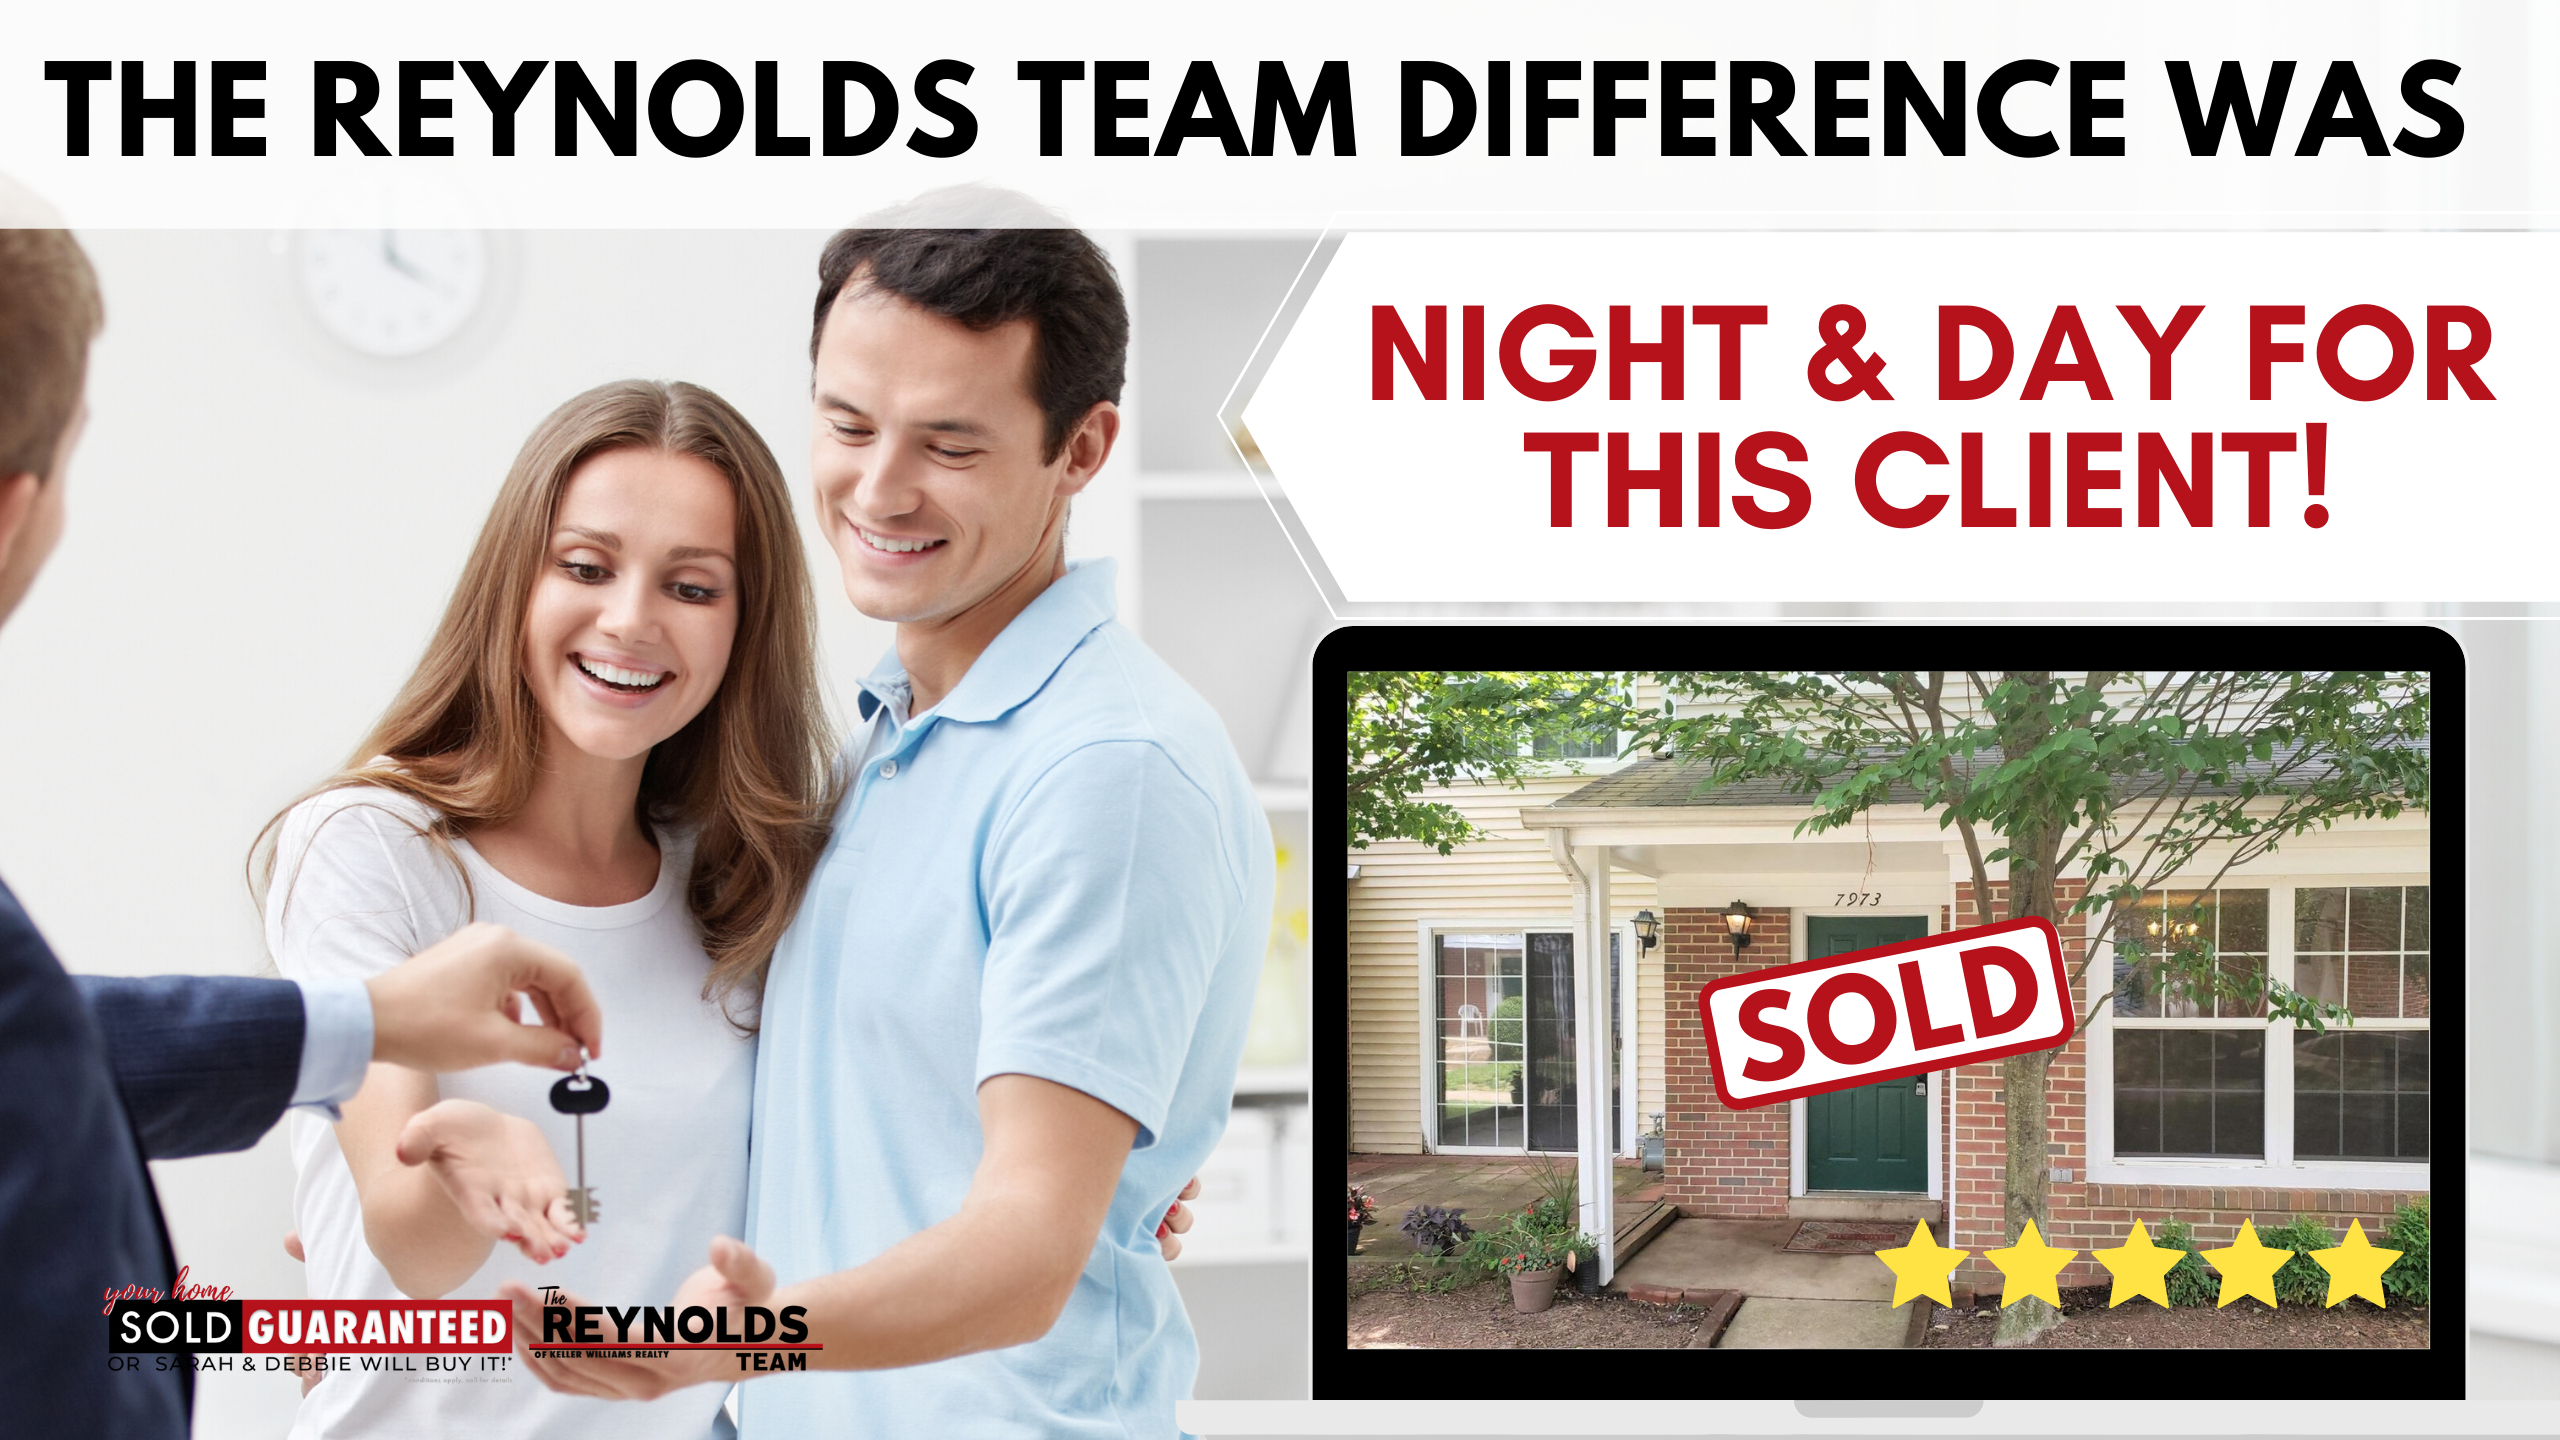 The Reynolds Team Difference Was Night & Day For This Client!